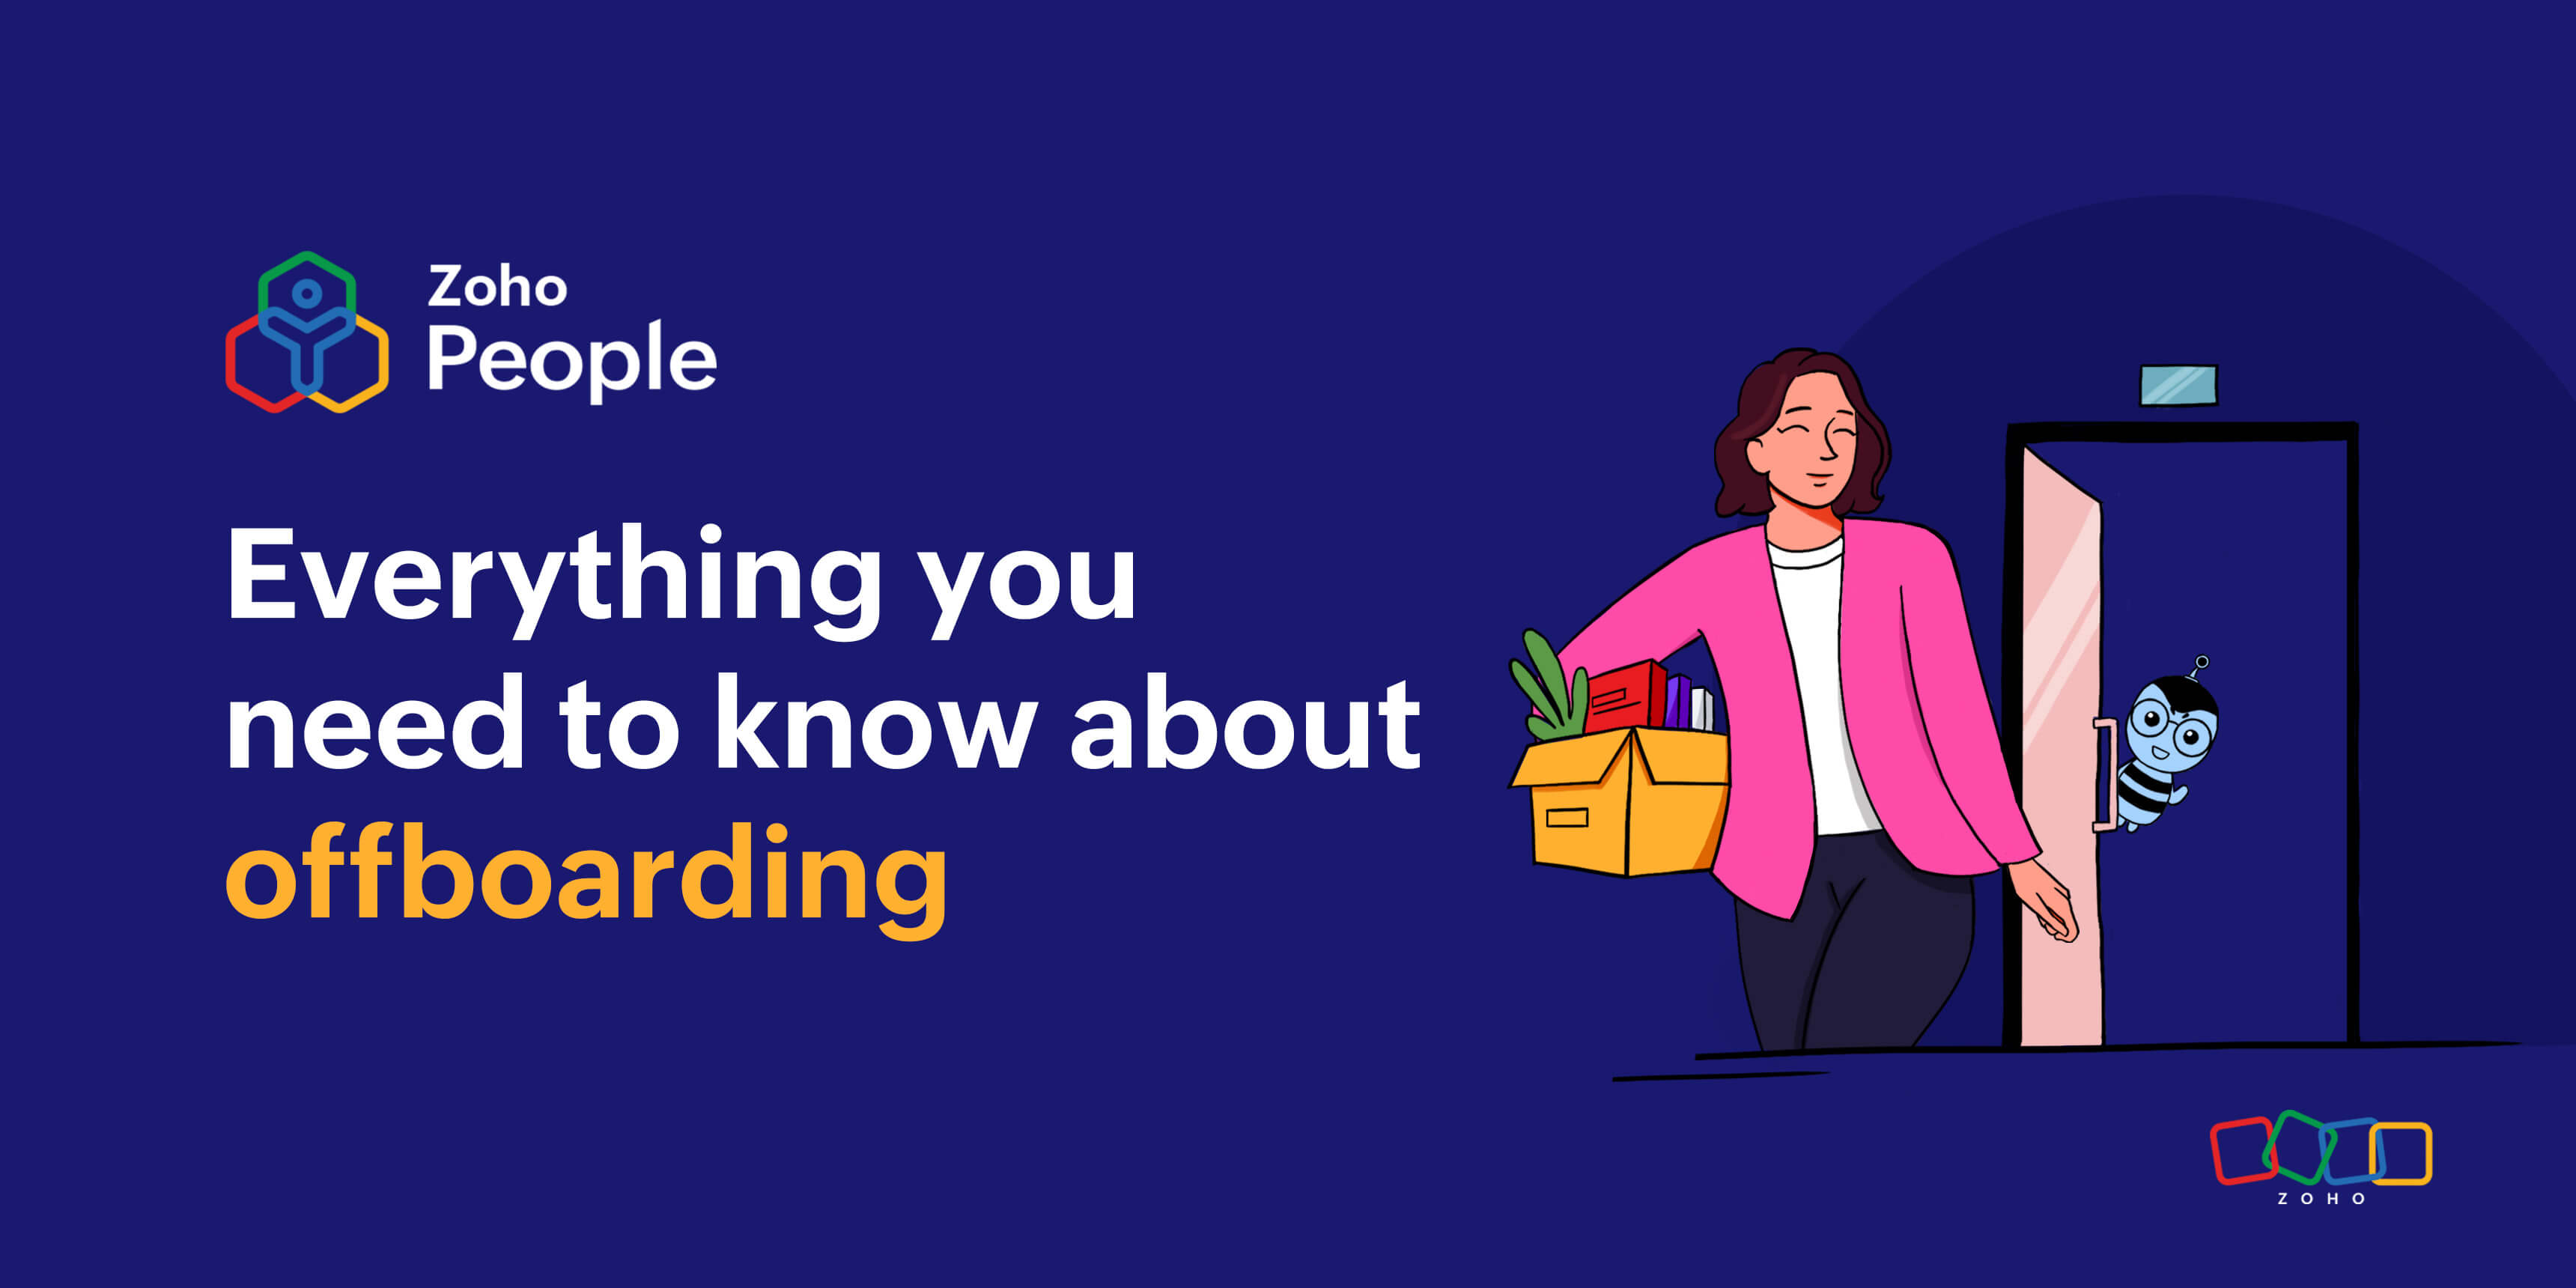 What are the different steps involved in offboarding?